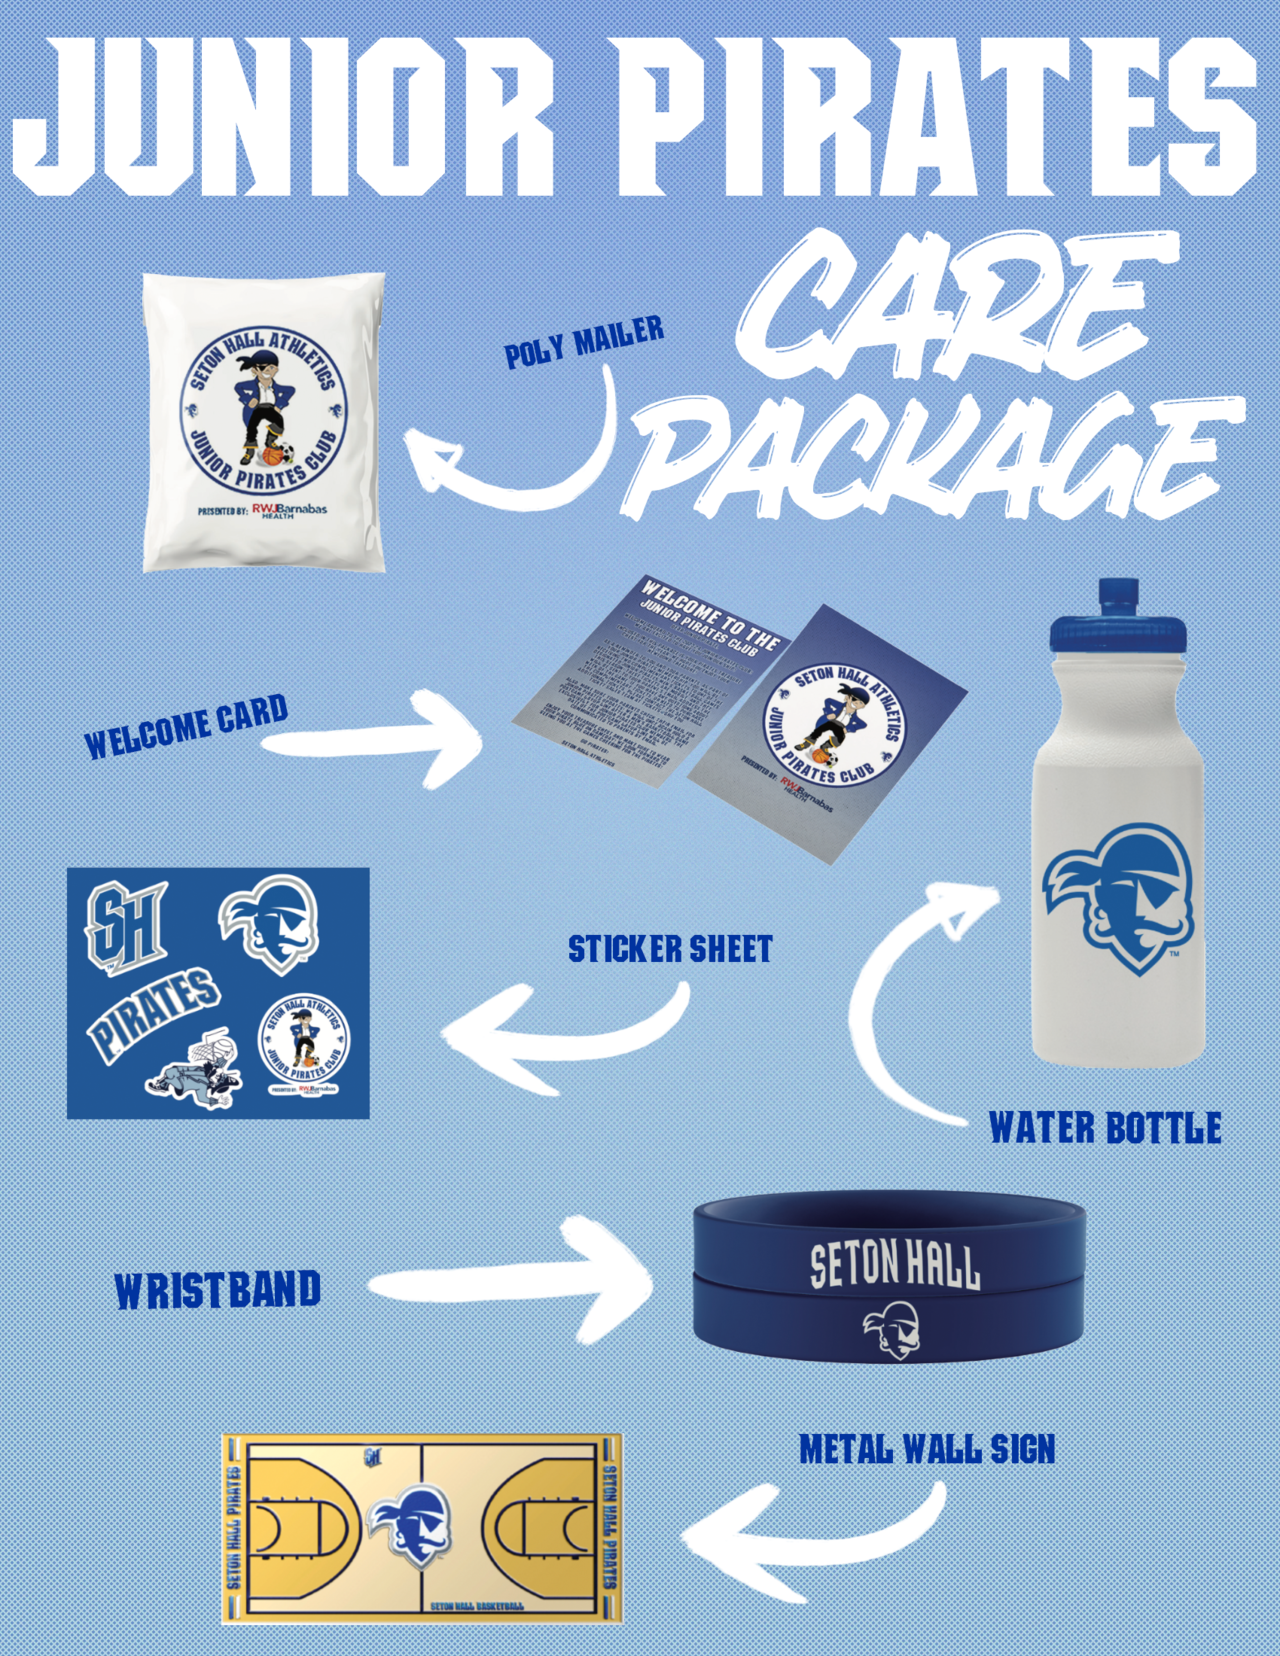 A graphic of all the components of the Junior Pirates Club Care Pacakage